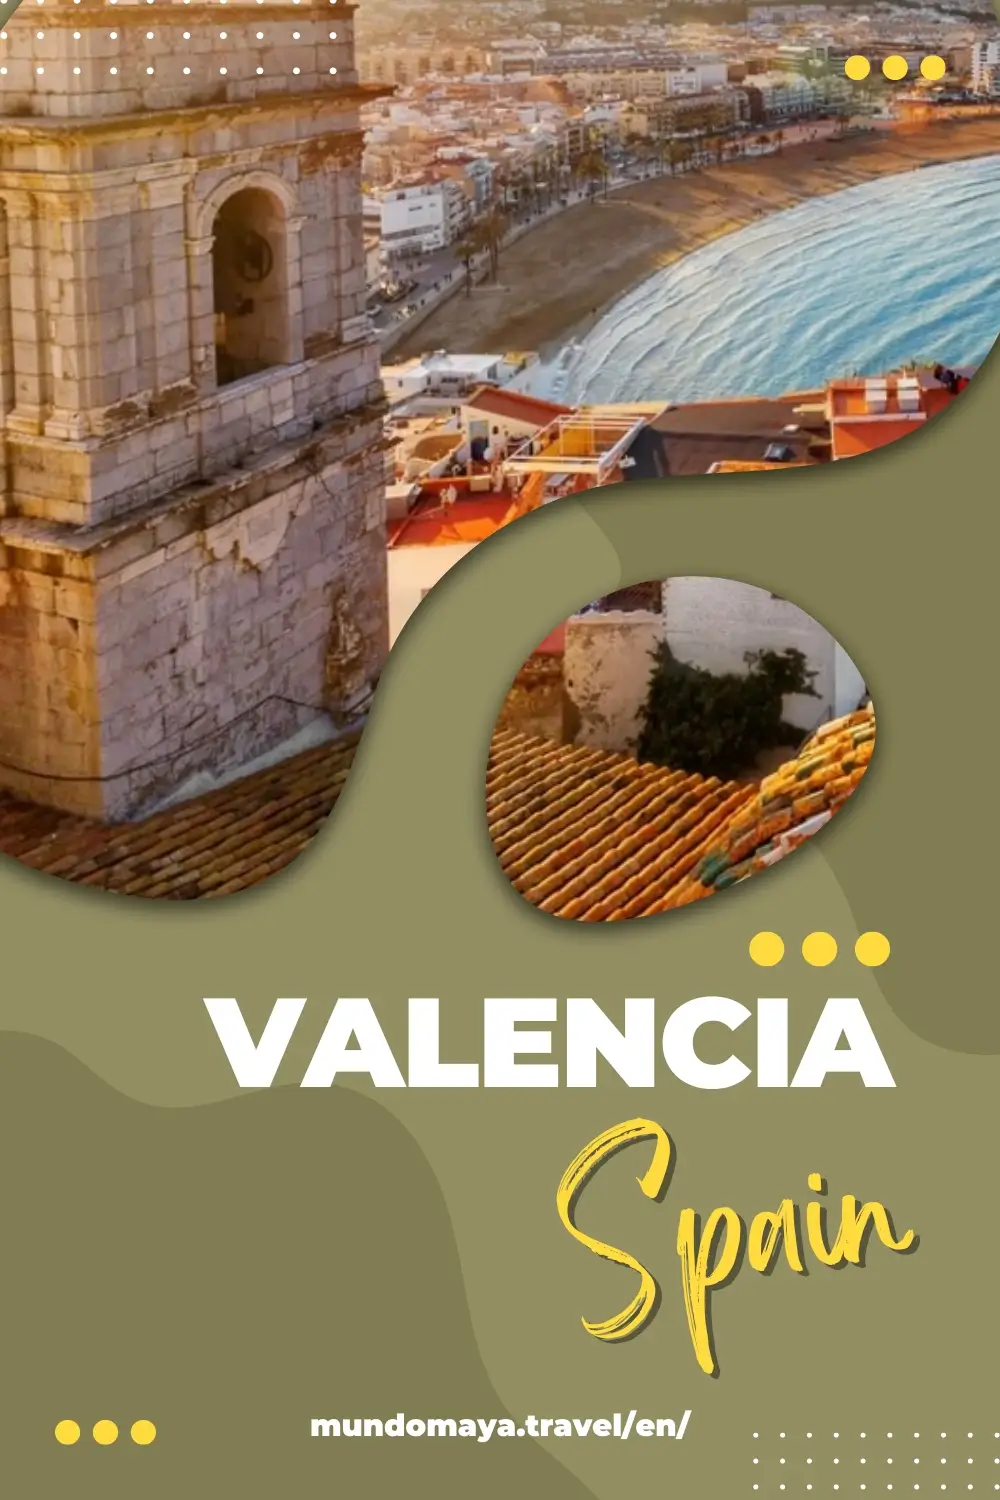 Valencia Spain: 10+ Destinations to Visit in Spain’s Most Underrated City